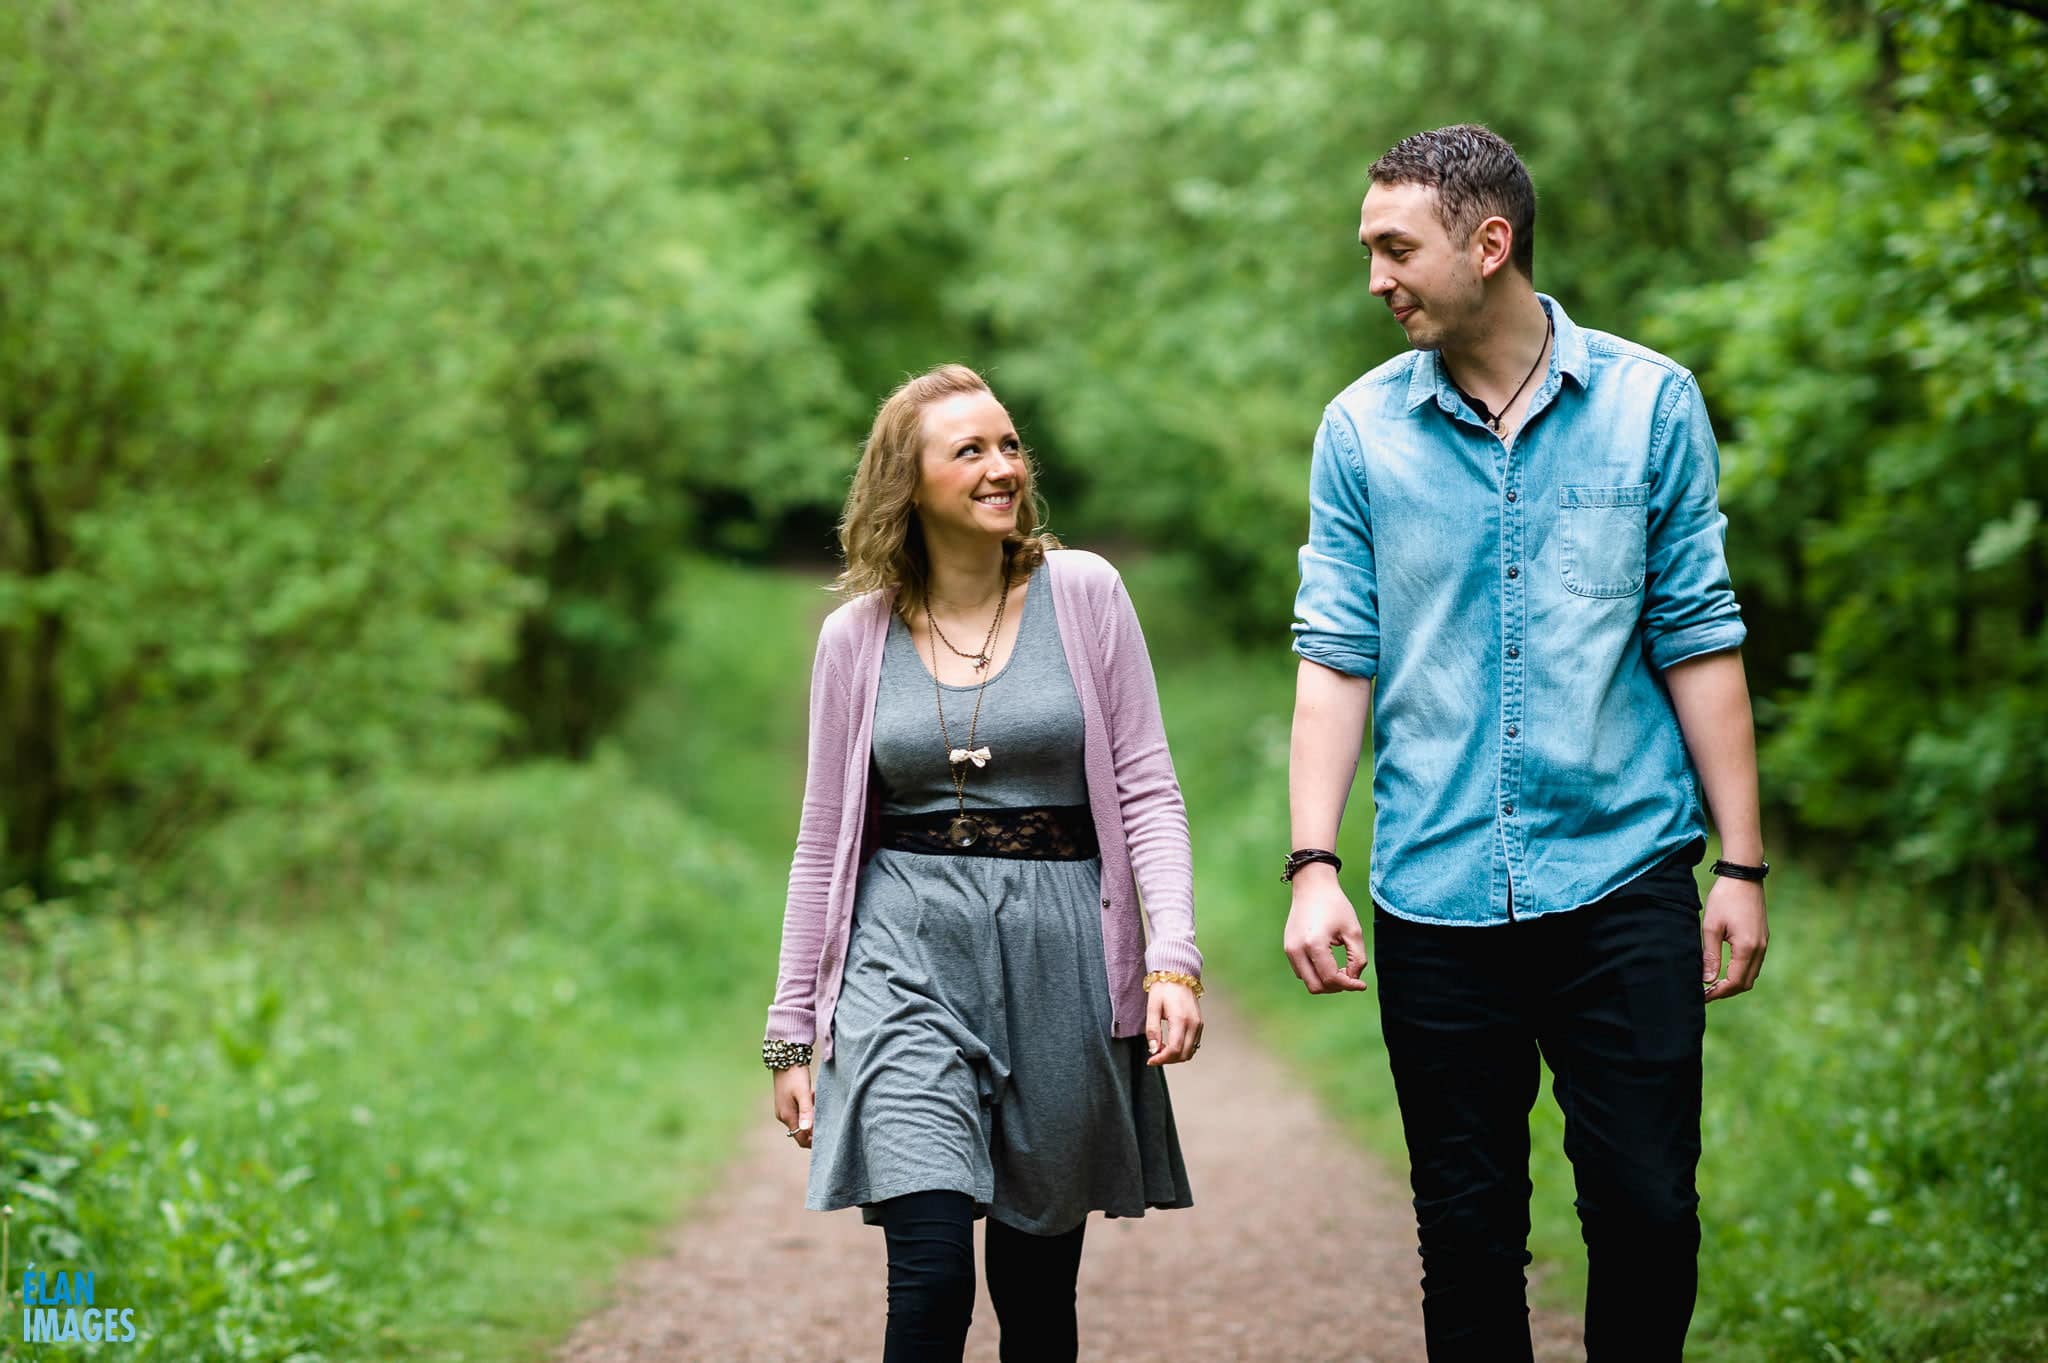 Engagement Photo Shoot in the Bluebell Woods near Bristol 1